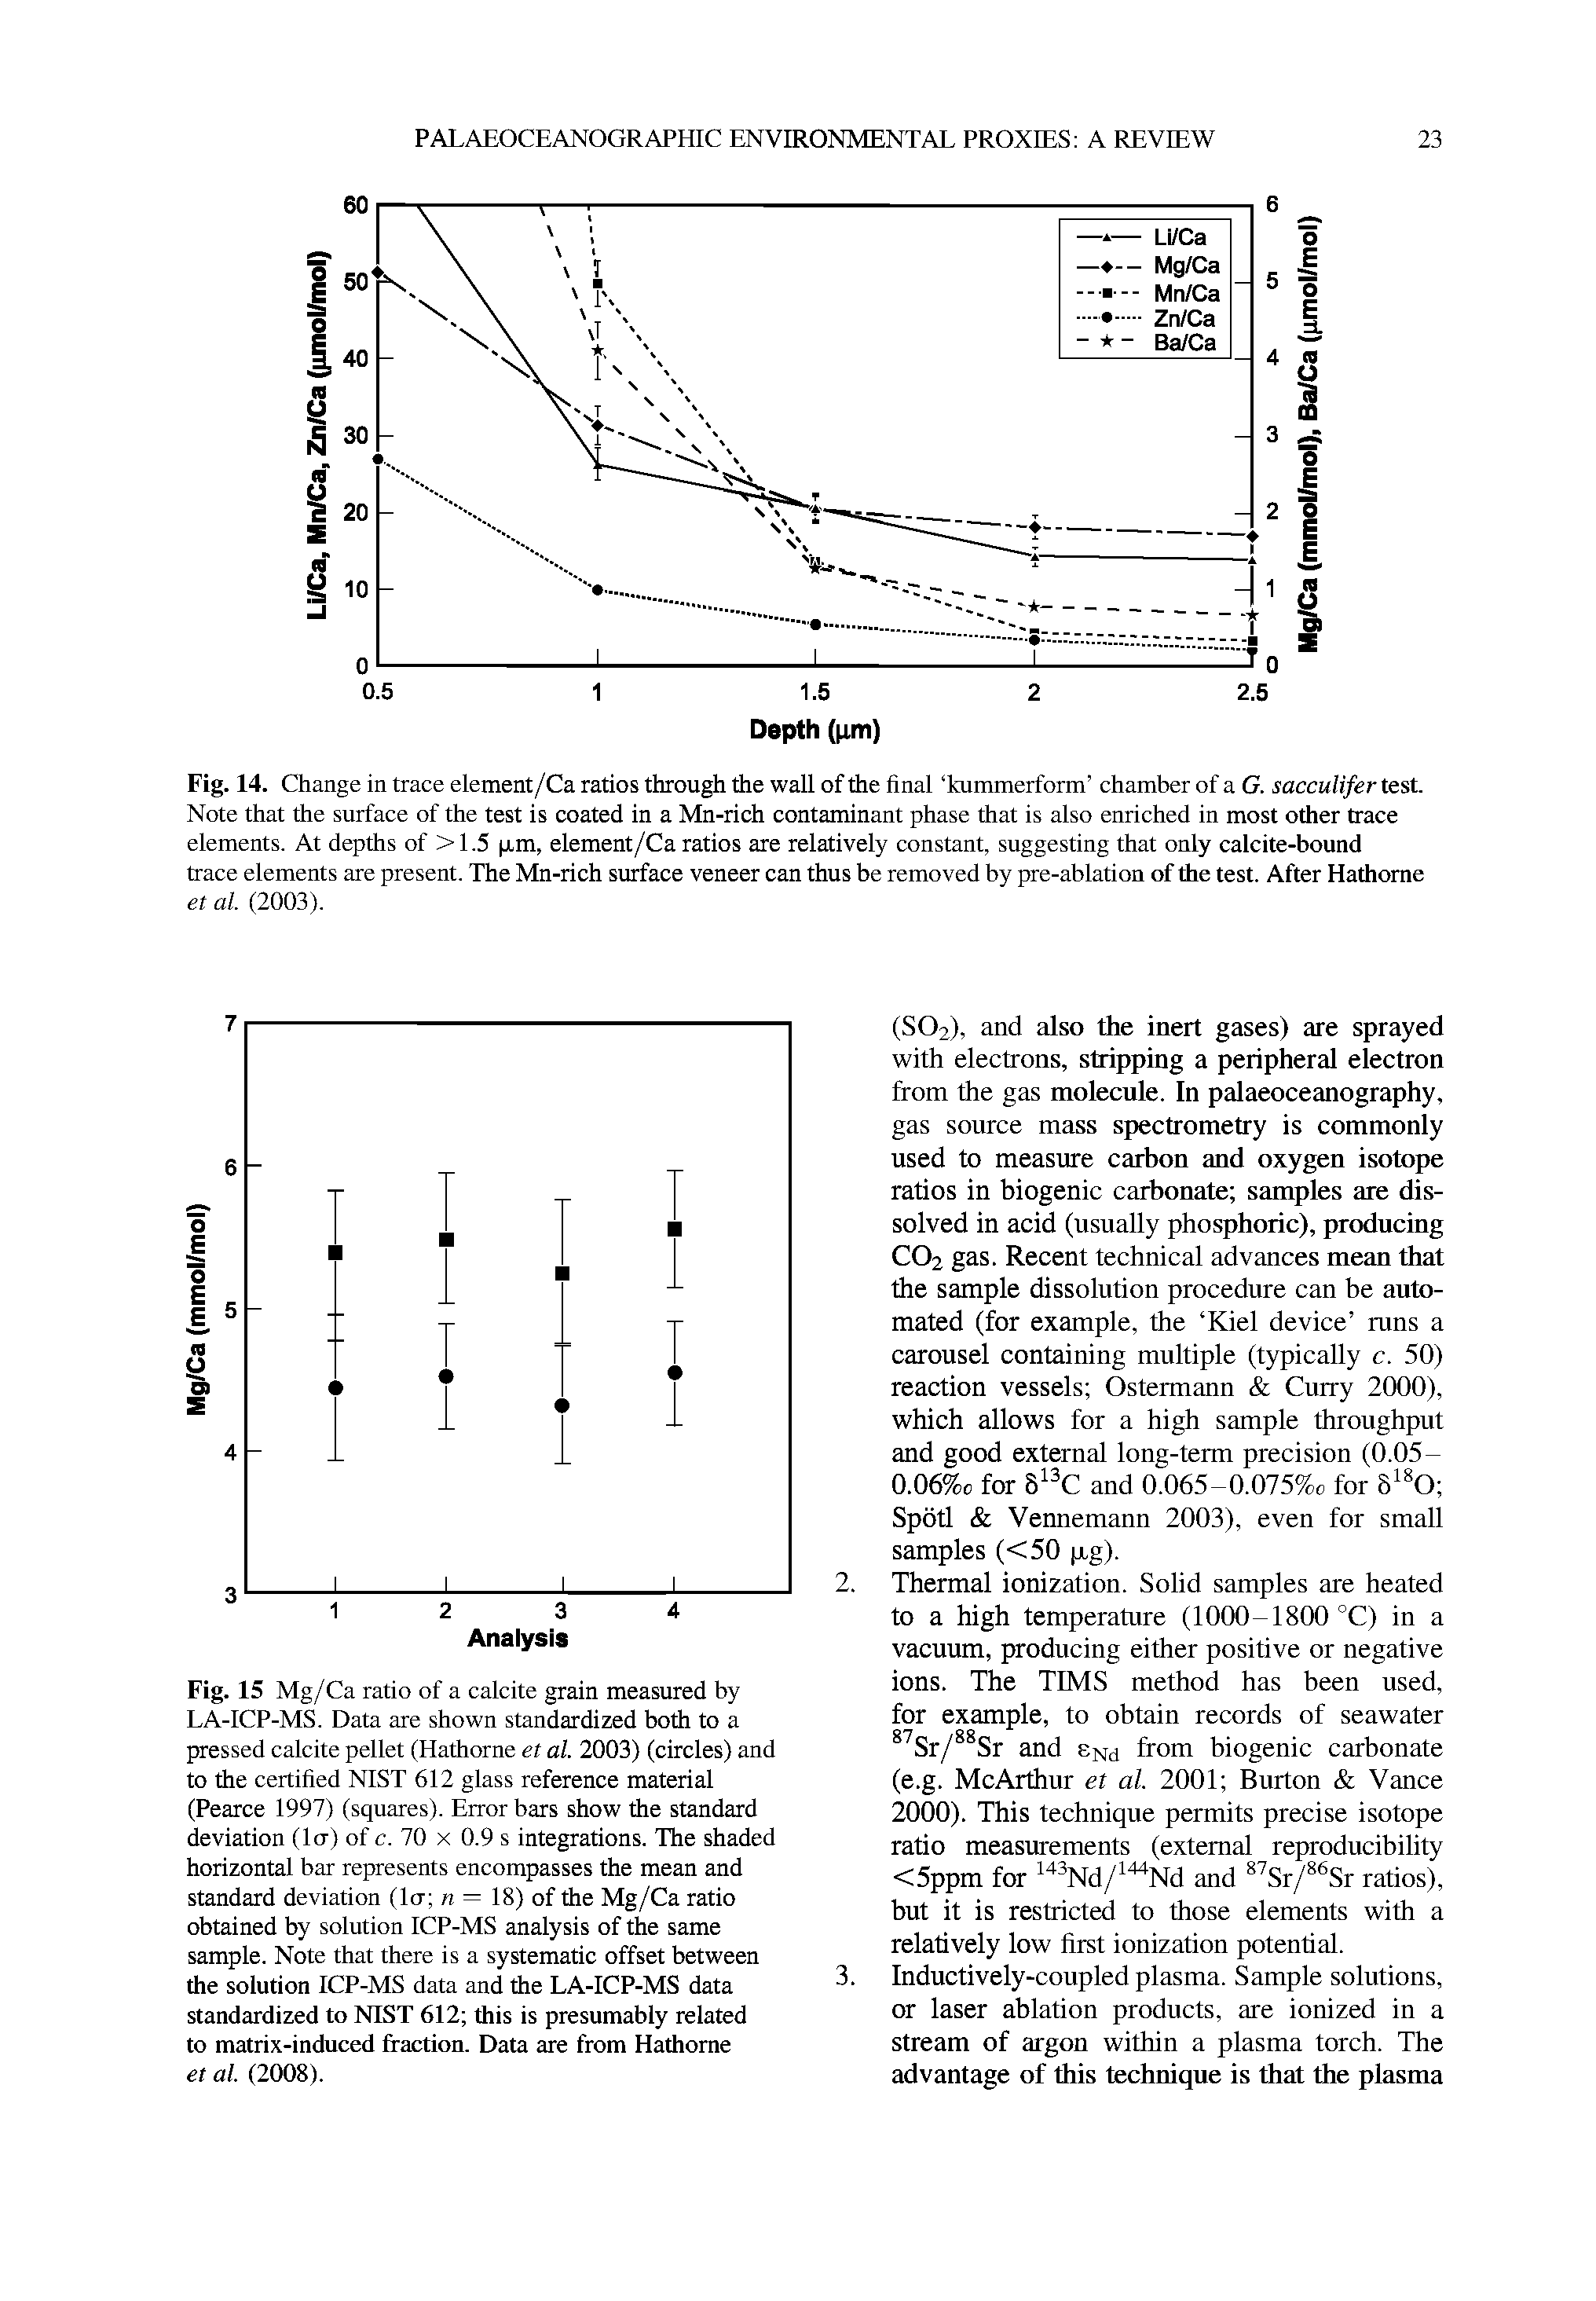 Fig. 15 Mg/Ca ratio of a calcite grain measured by LA-ICP-MS. Data are shown standardized both to a pressed calcite pellet (Hathorne et al. 2003) (circles) and to the certified NIST 612 glass reference material (Pearce 1997) (squares). Error bars show the standard deviation (Itr) of c. 70 x 0.9 s integrations. The shaded horizontal bar represents encompasses the mean and standard deviation (Itr n = 18) of the Mg/Ca ratio obtained by solution ICP-MS analysis of the same sample. Note that there is a systematic offset between the solution ICP-MS data and the LA-ICP-MS data standardized to NIST 612 this is presumably related to matrix-induced fraction. Data are from Hathorne et al. (2008).